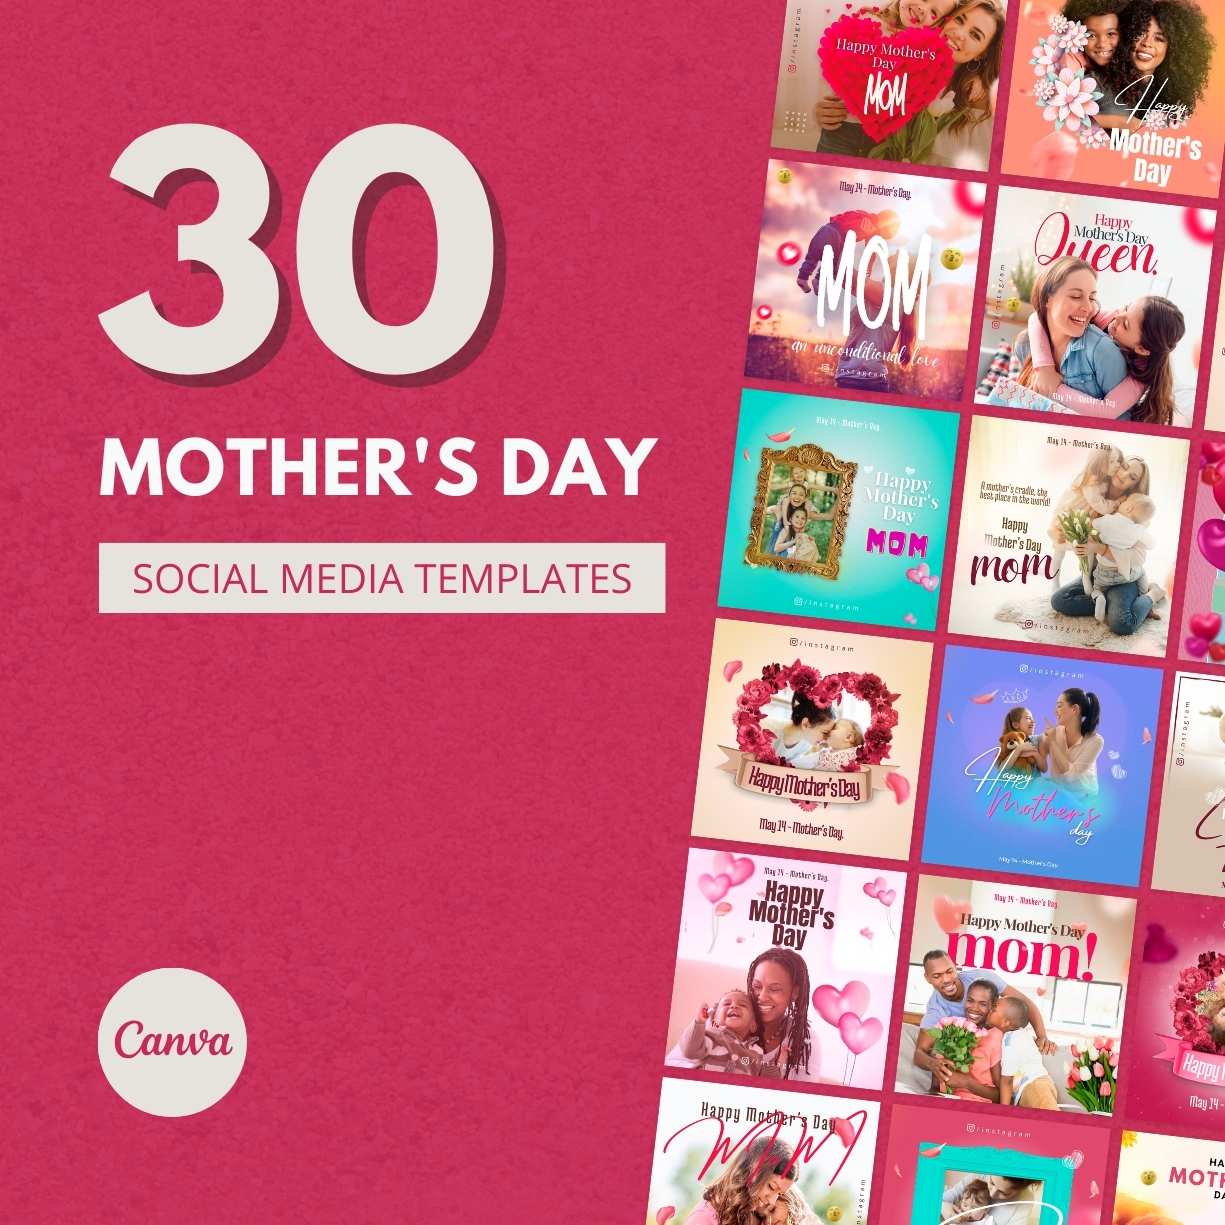 30 Premium Mother's Day Canva Templates For Social Media cover image.